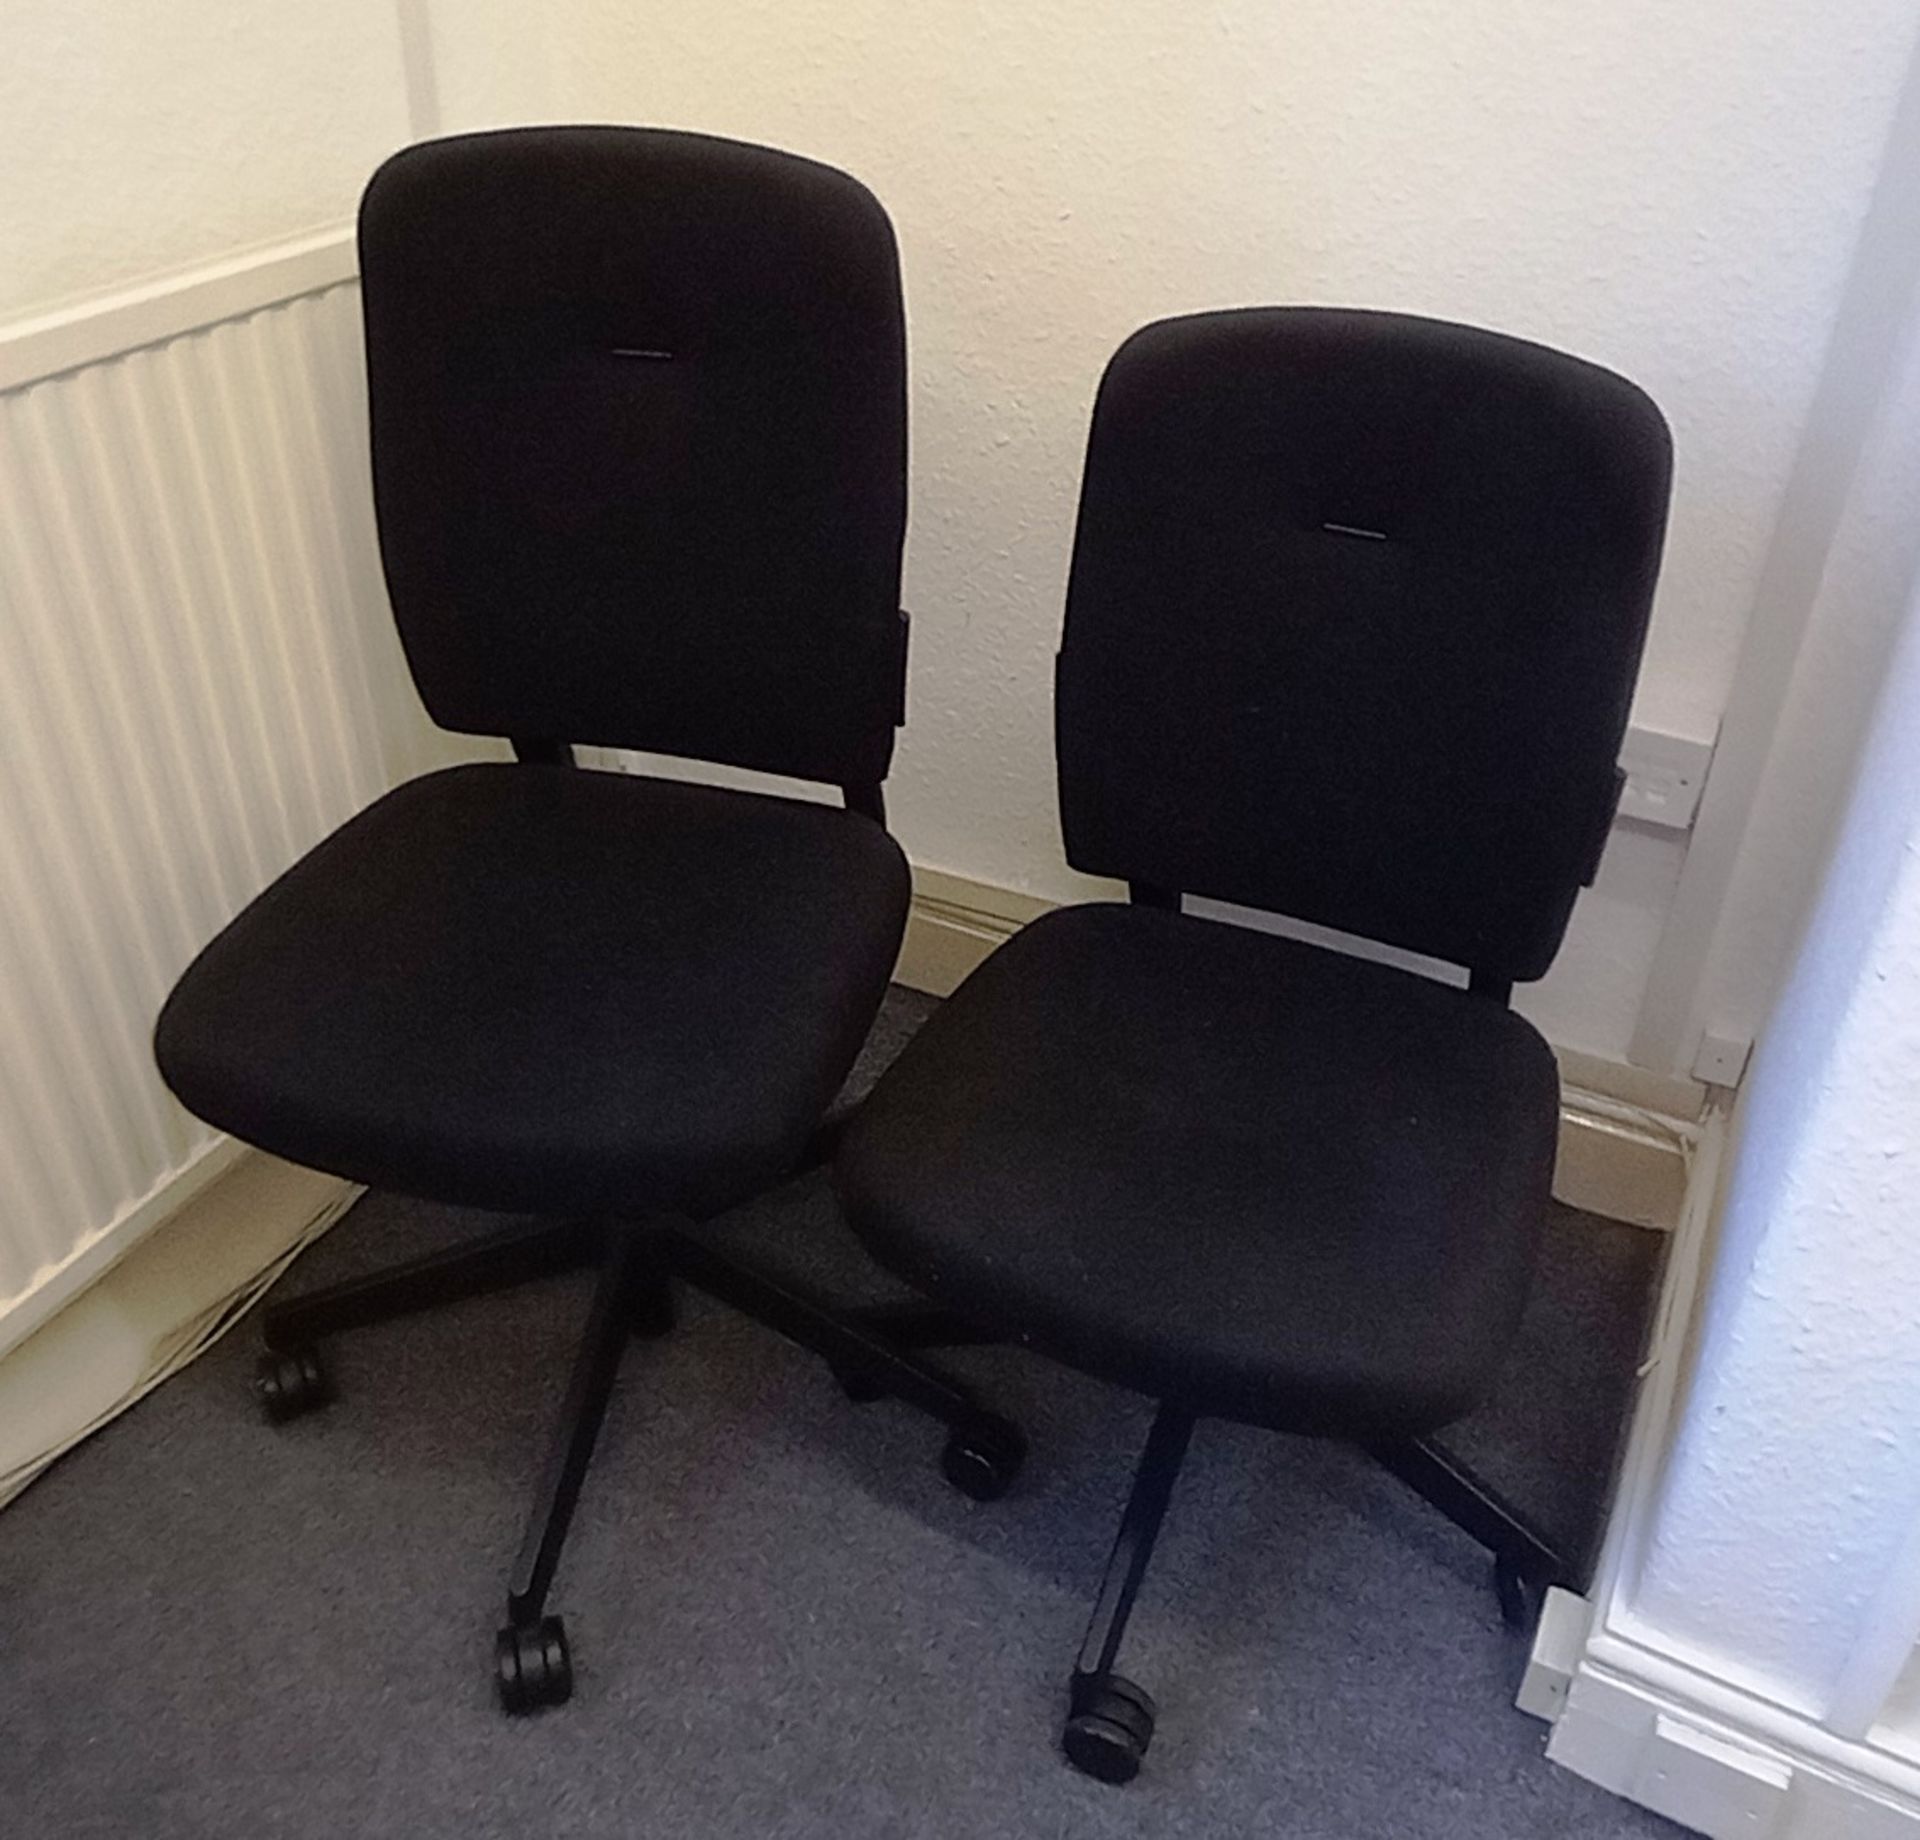 2x office chairs - Image 2 of 2